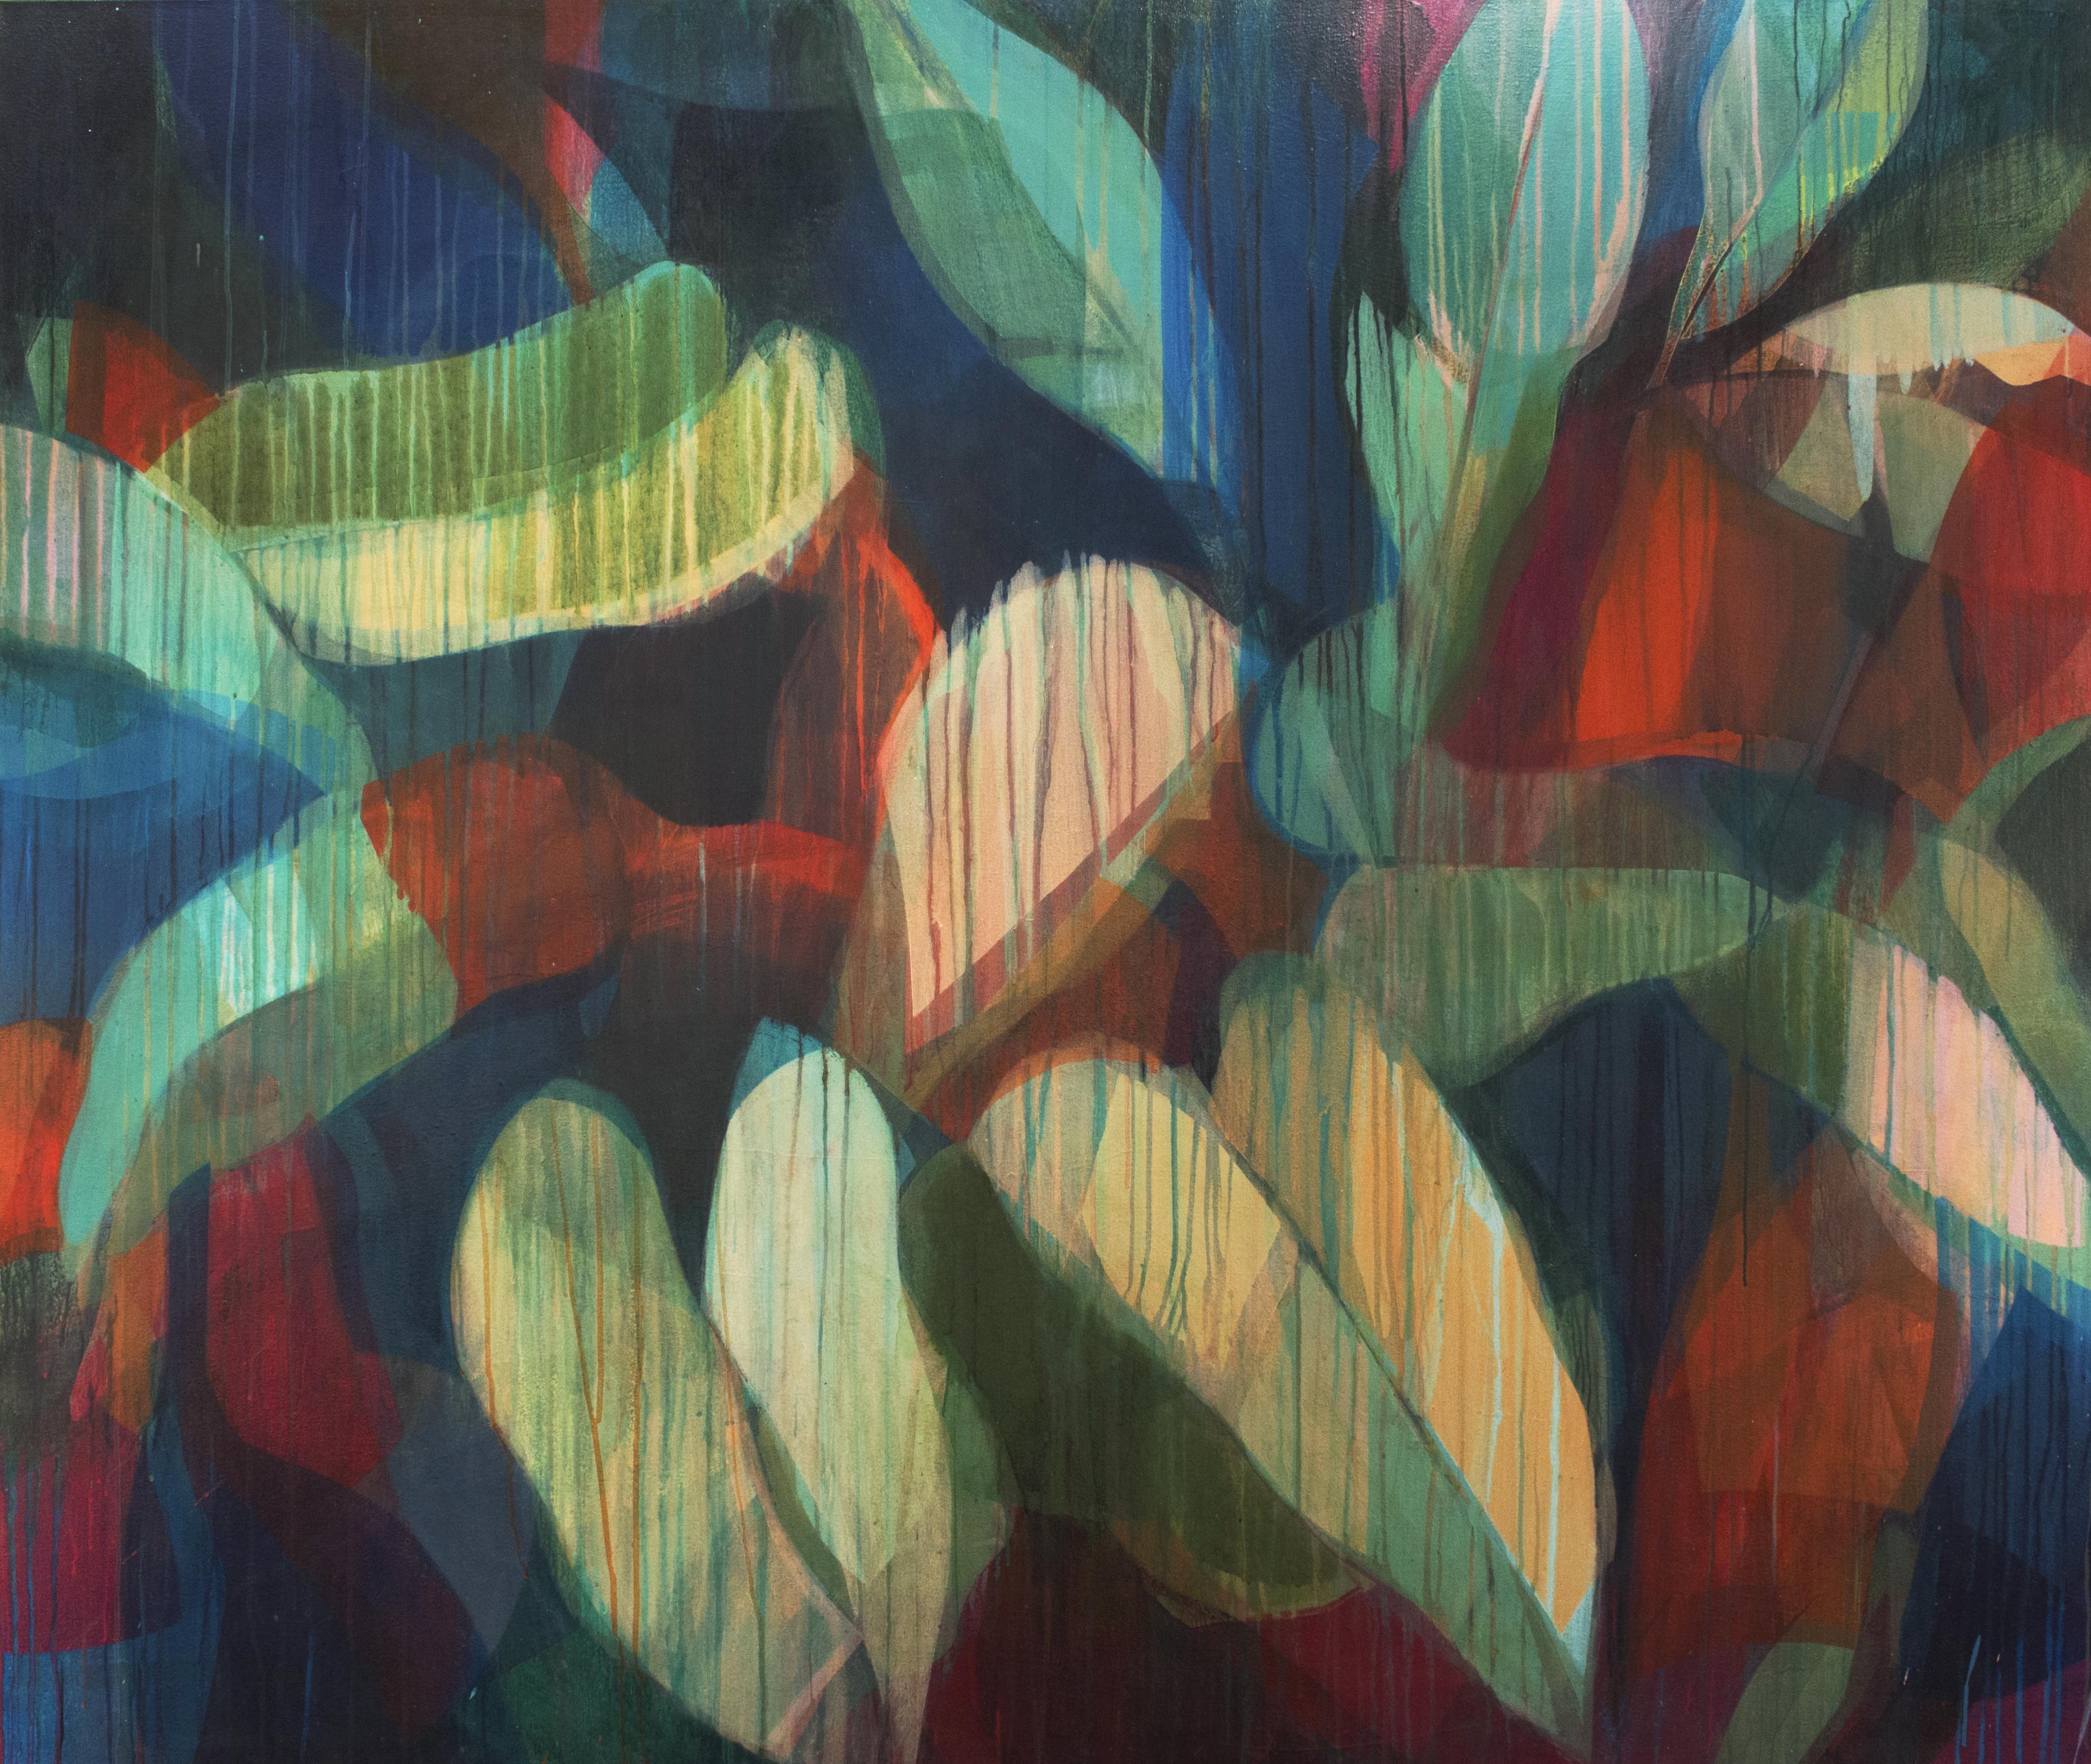 The landscape of Bermuda is the subject of this abstract painting. Inspired by the Elephant Ears plant, this abstract painting incorporates layers of blue, green and red. It is water-based media on canvas.

In 2014, Katherine Sandoz traveled to